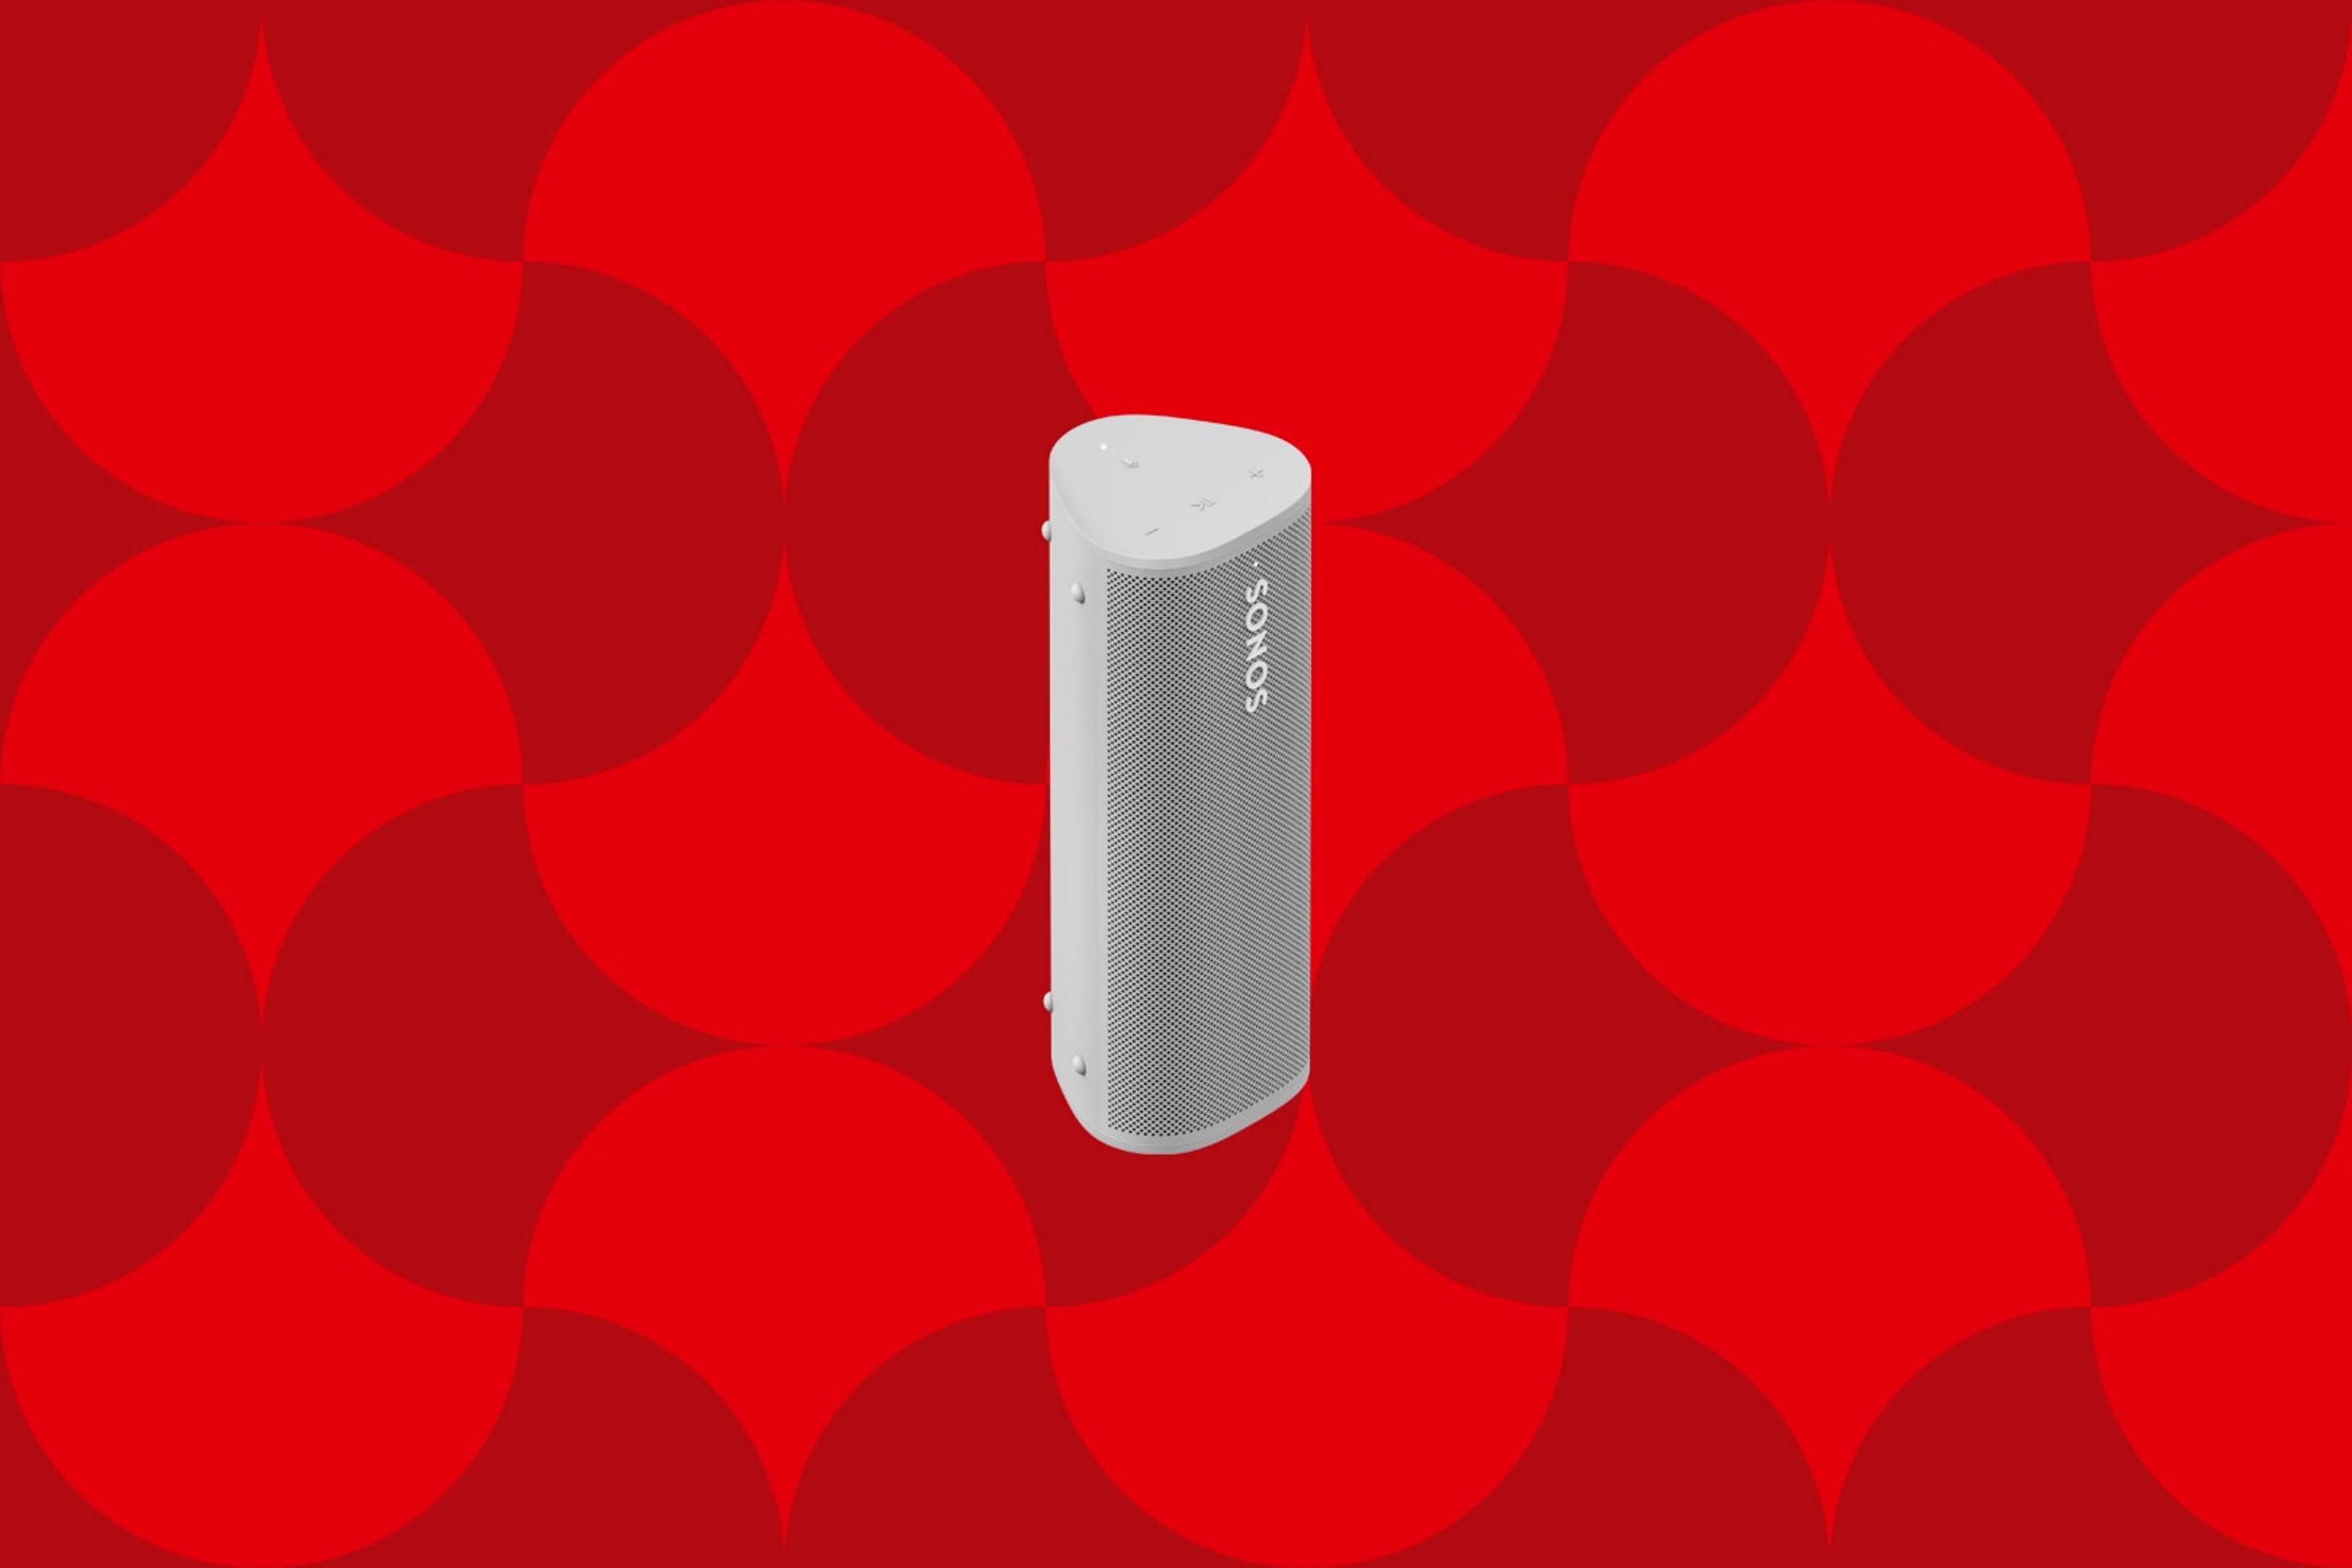 Image of a white Sonos Roam portable speaker on a red graphic holiday background